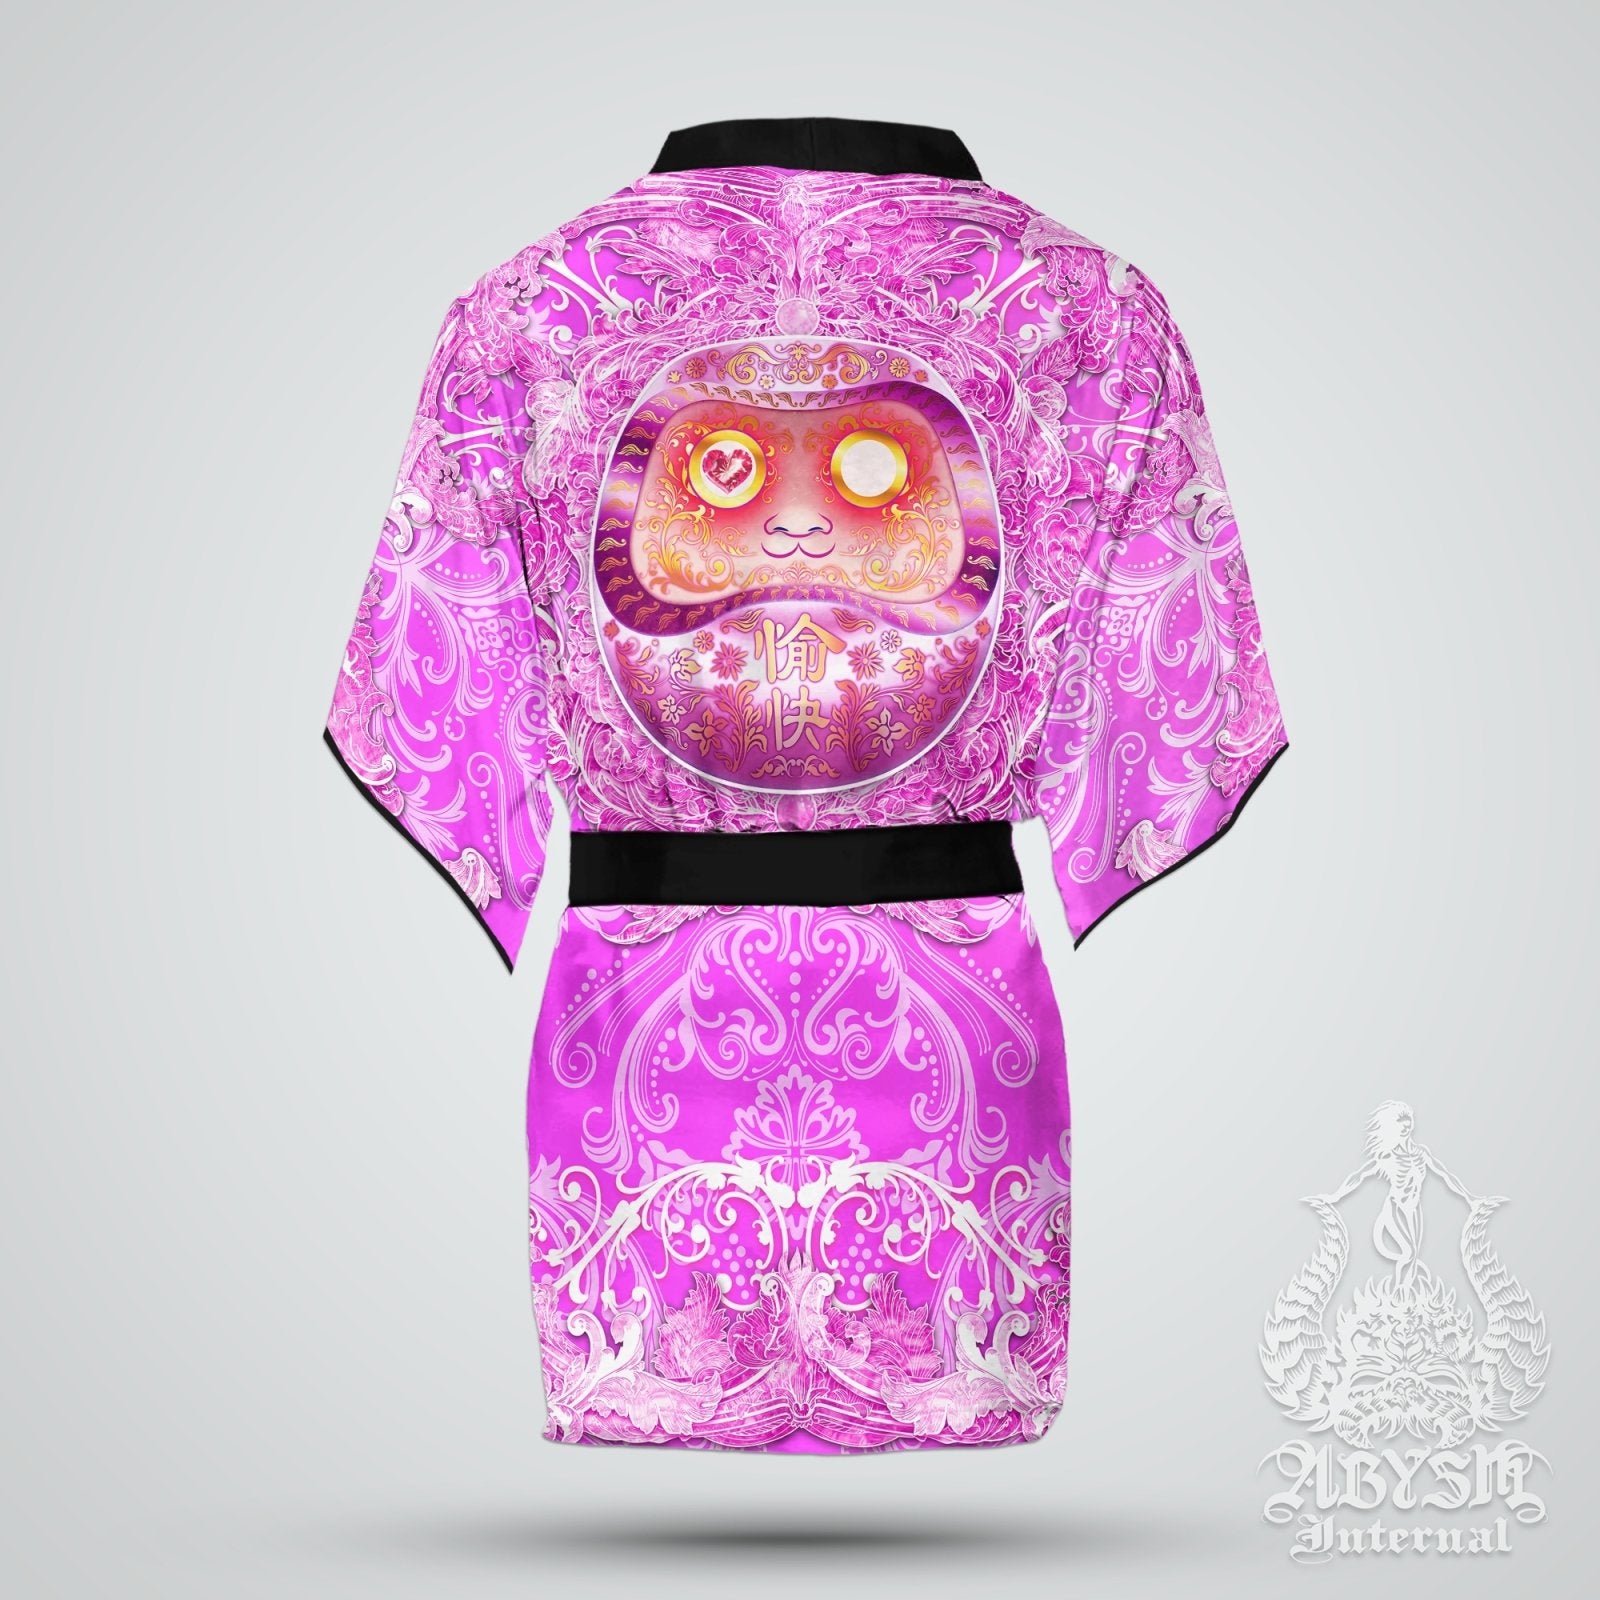 Daruma Cover Up, Beach Rave Outfit, Party Kimono, Japanese Summer Festival Robe, Indie and Alternative Clothing, Unisex - Kawaii - Abysm Internal